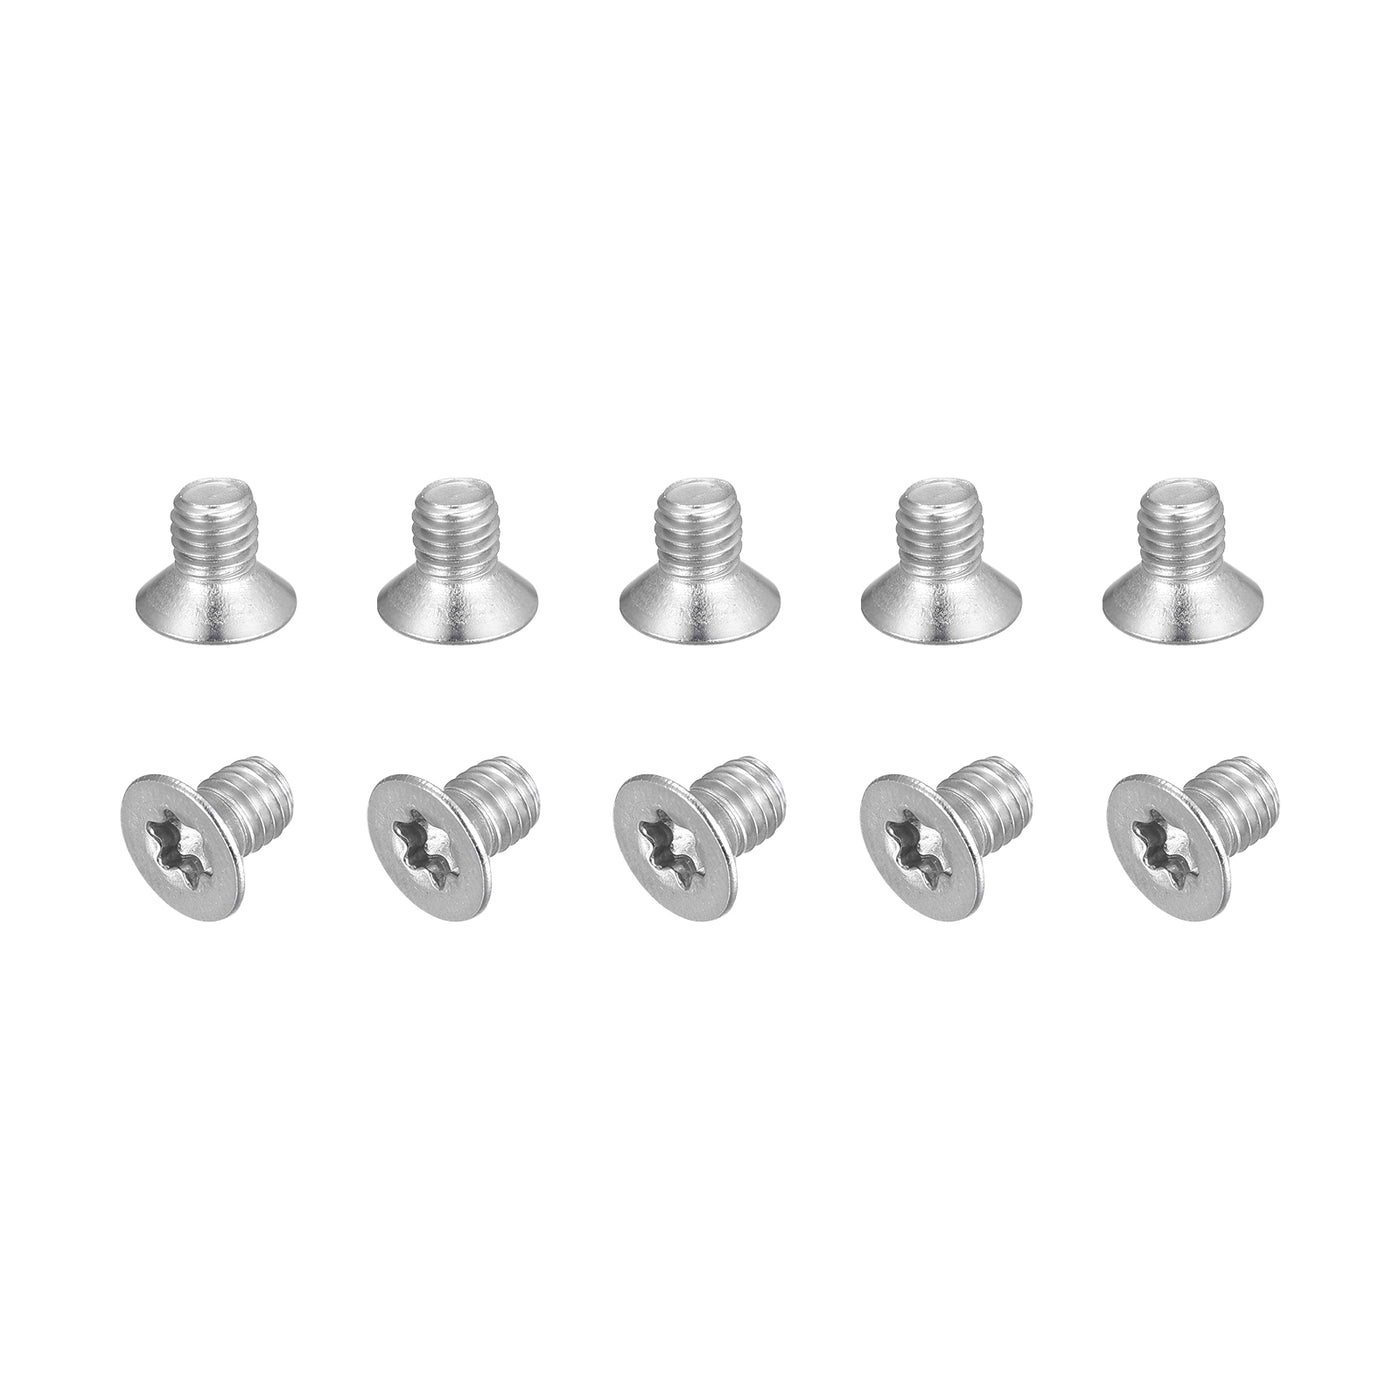 uxcell Uxcell M5x8mm Torx Security Screws, 10pcs 316 Stainless Steel Countersunk Head Screw